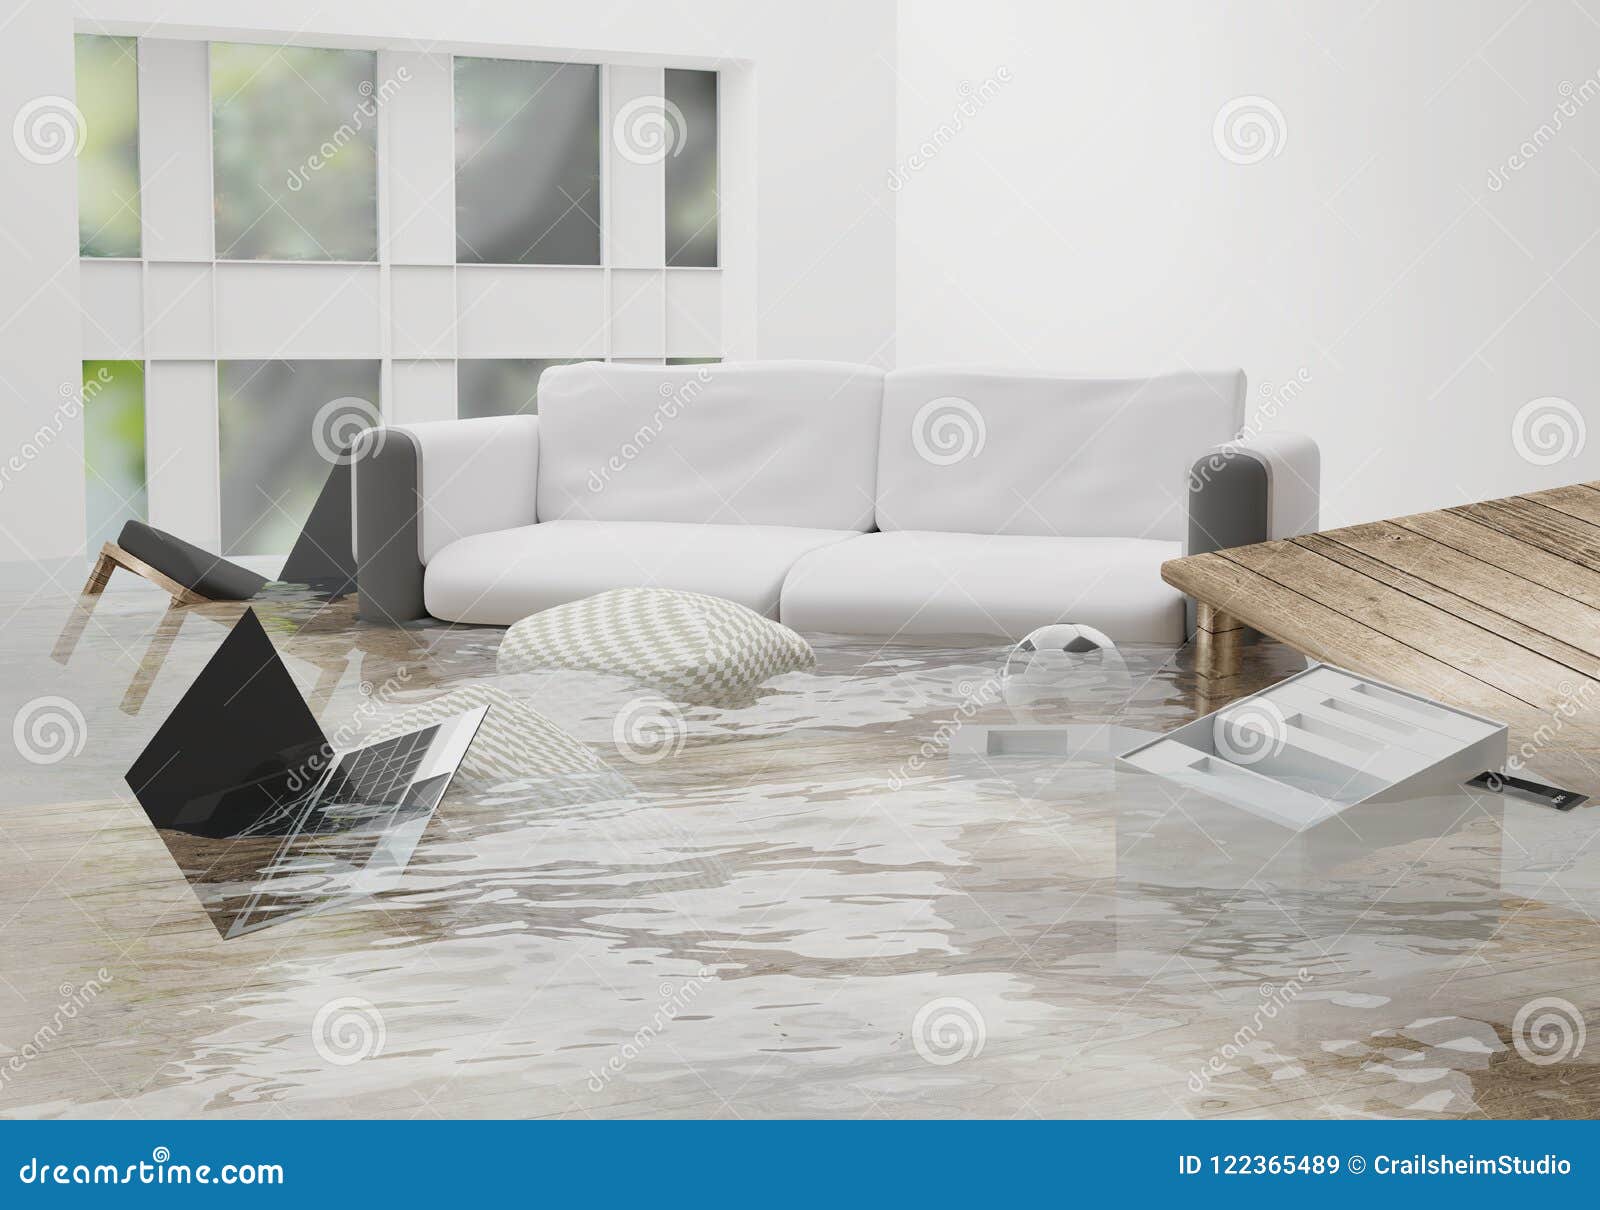 flooded water damage due to flooding in the house 3d-